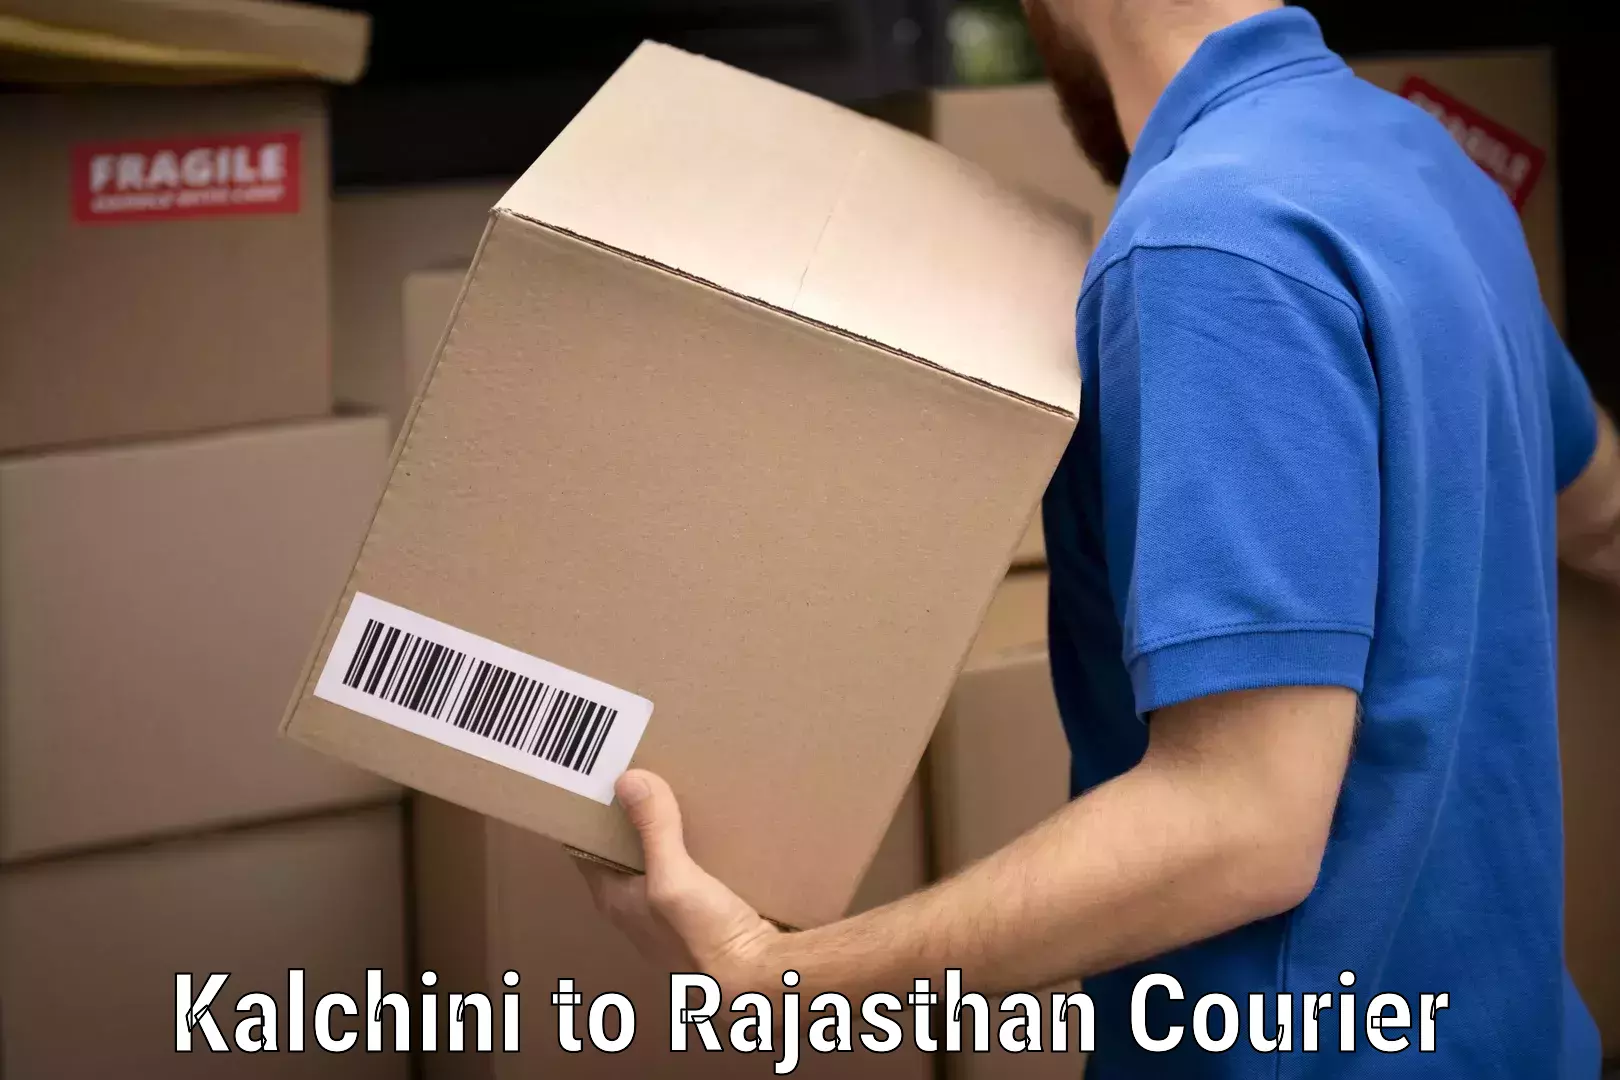 Furniture moving specialists Kalchini to Rajasthan